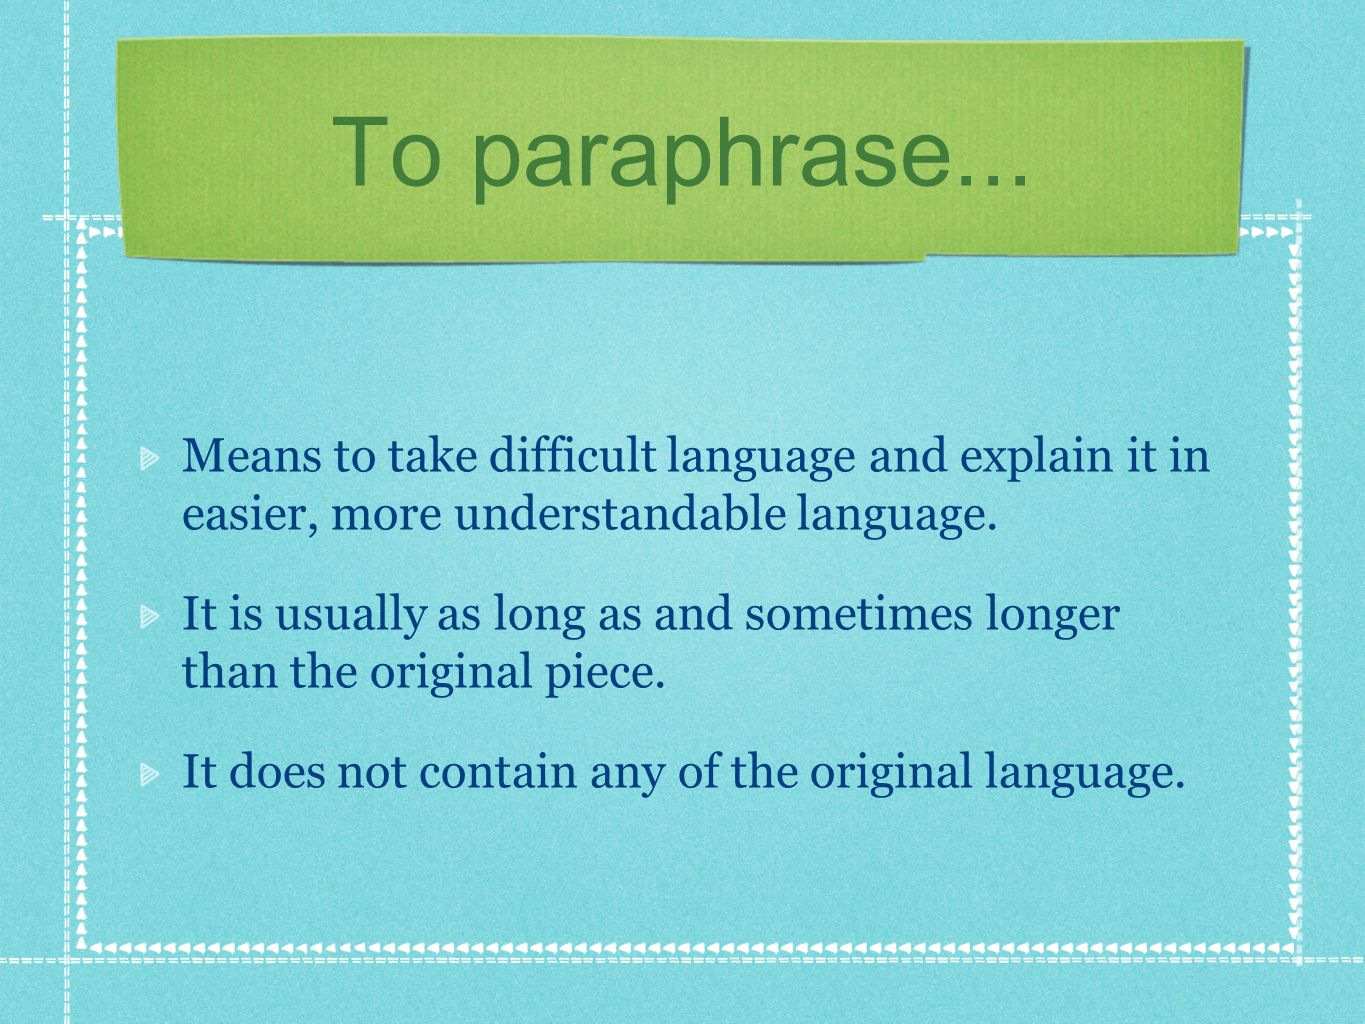 To paraphrase... Means to take difficult language and explain it in easier, more understandable language.